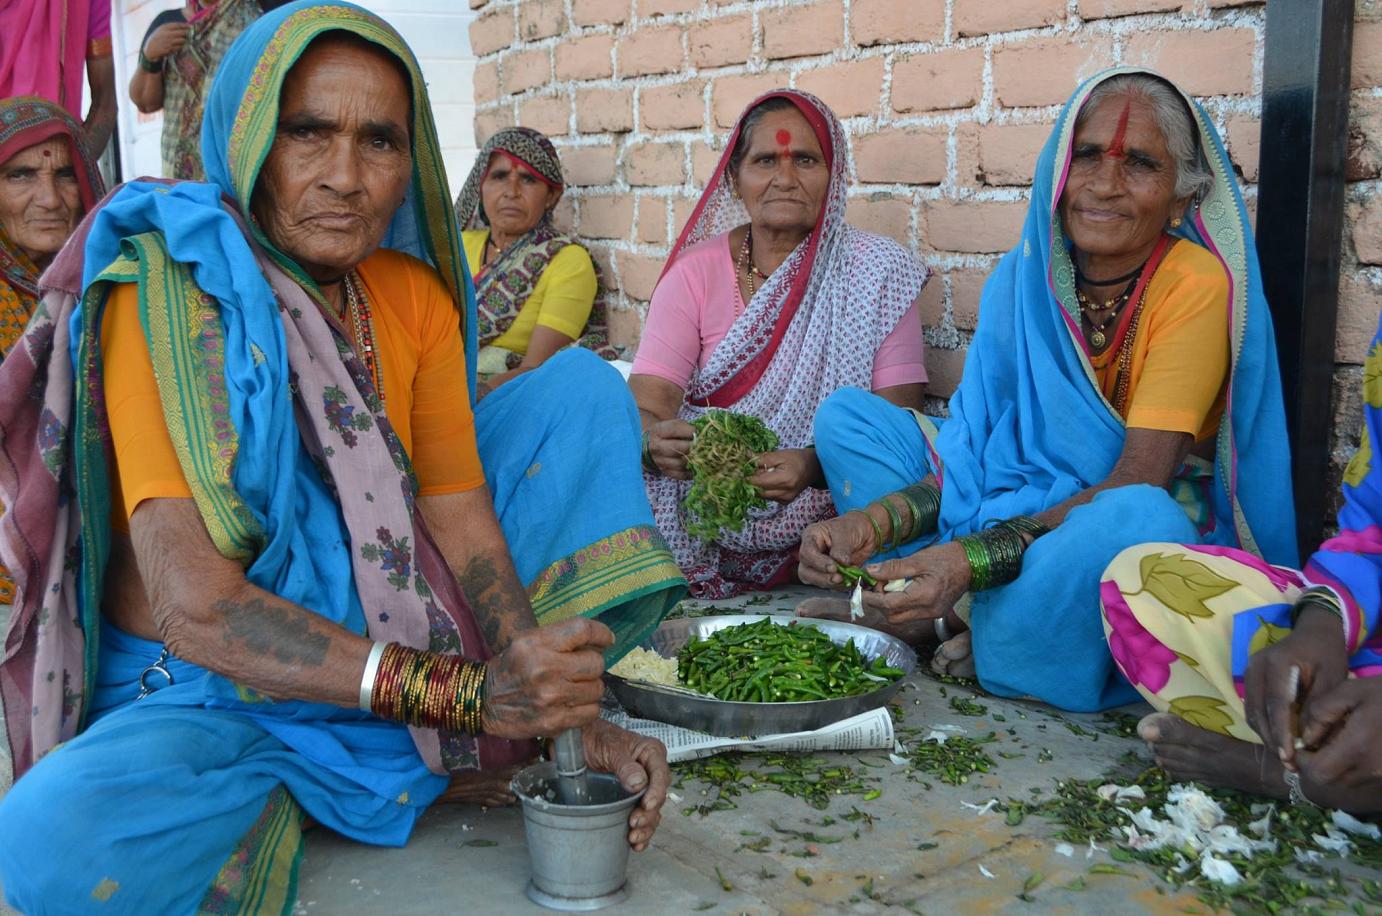 Women prepare dinner for the inauguration in India